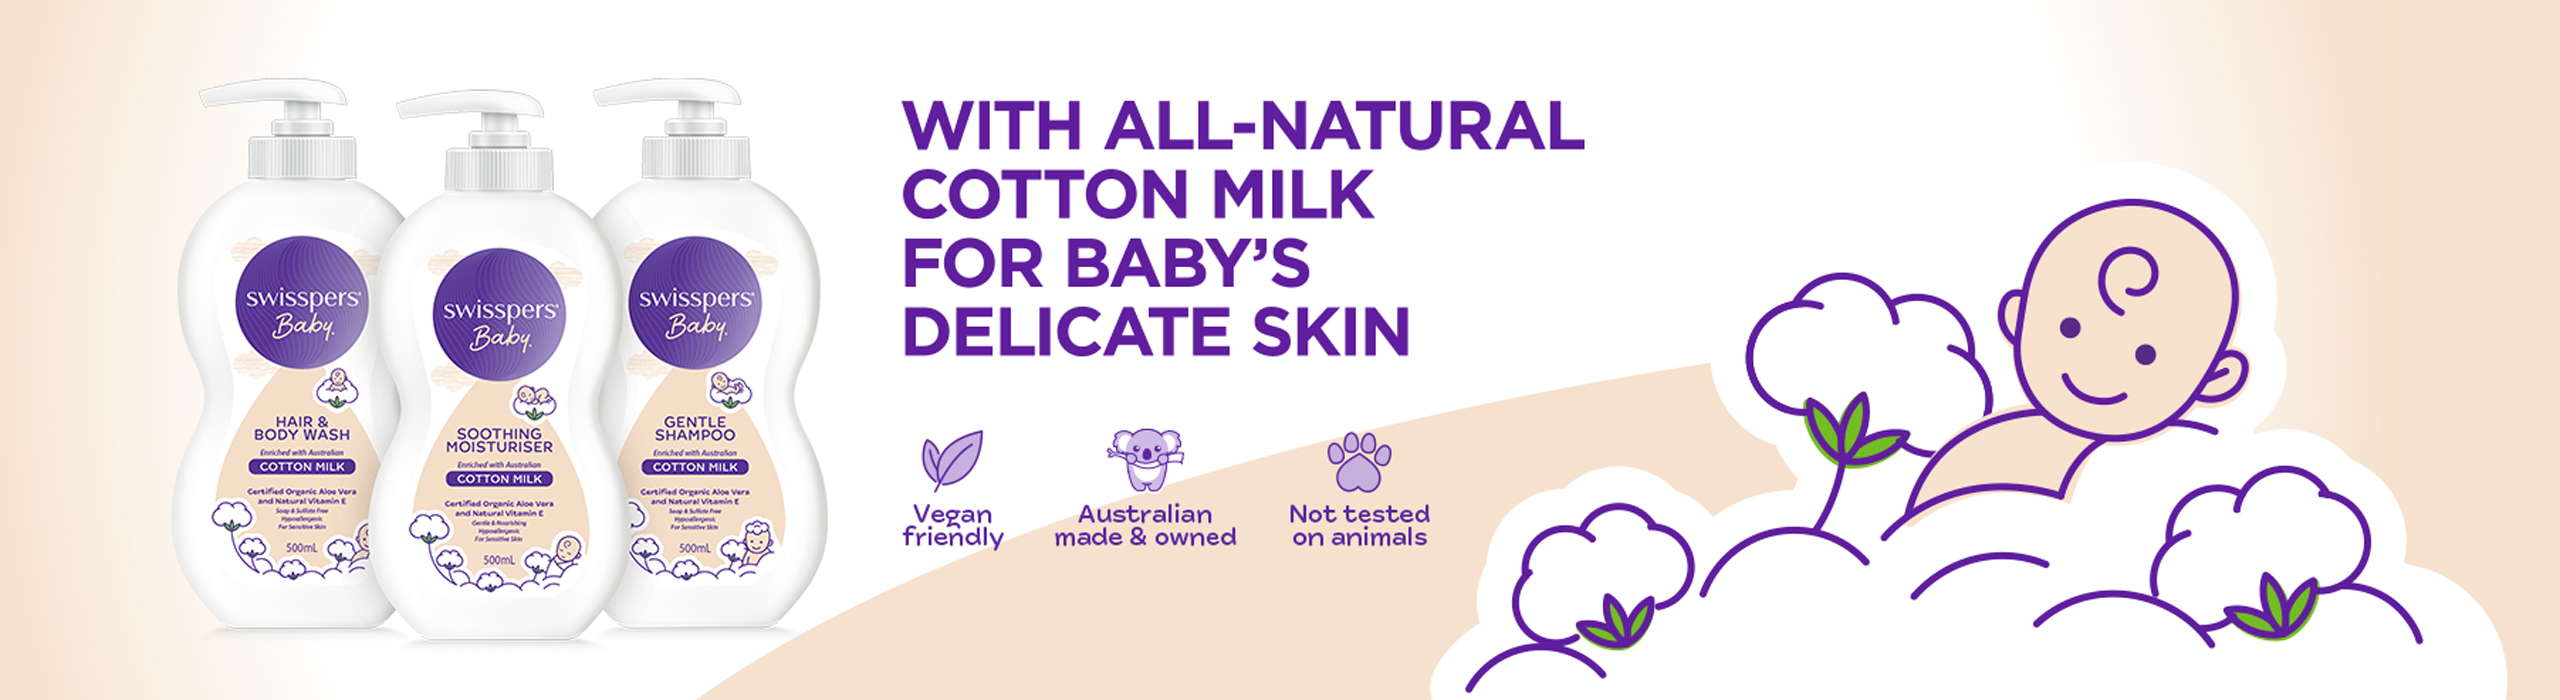 Swisspers Baby - With all-natural cotton milk for baby's delicate skin